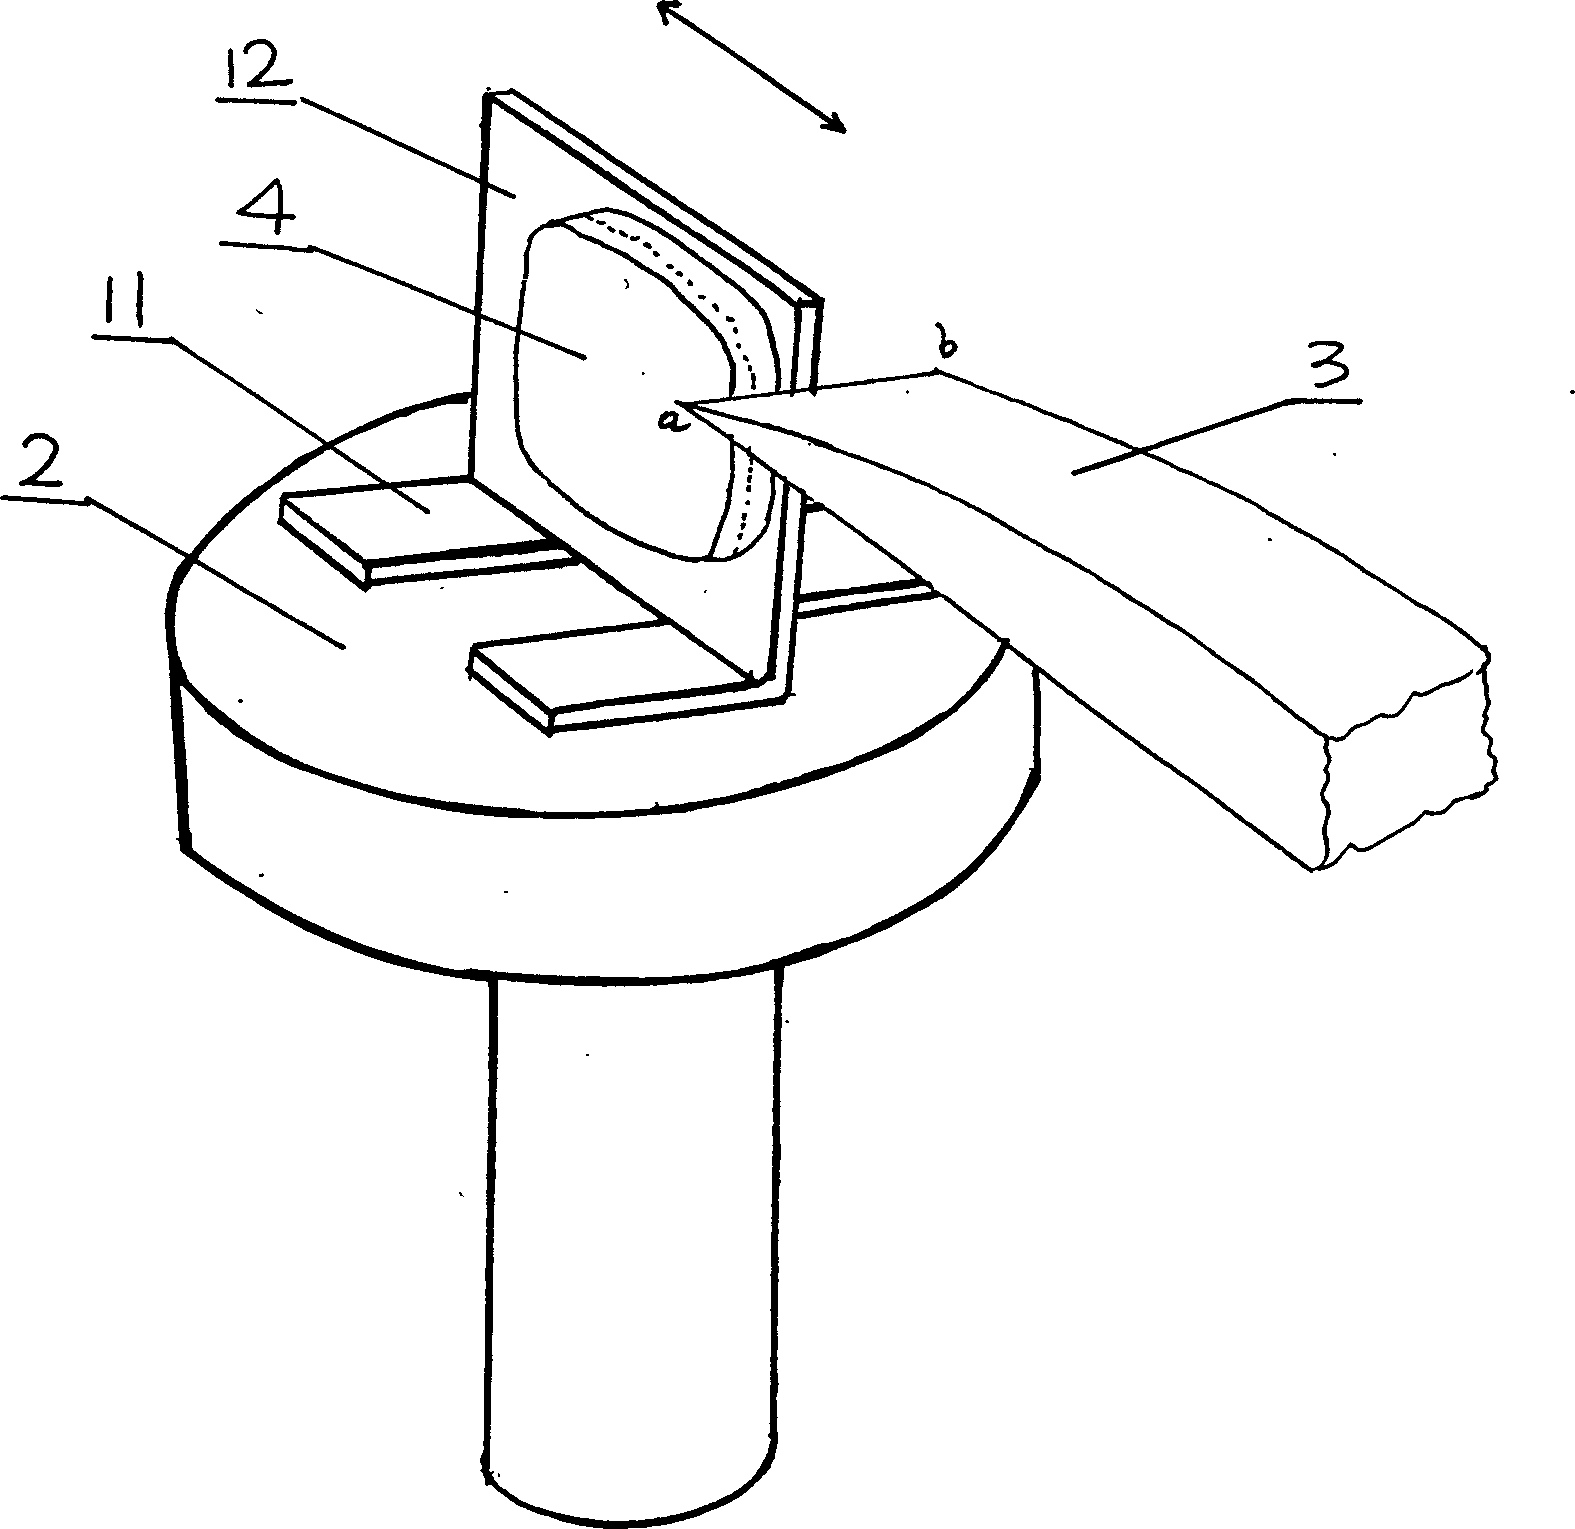 Method for fabricating section of biologic tissue